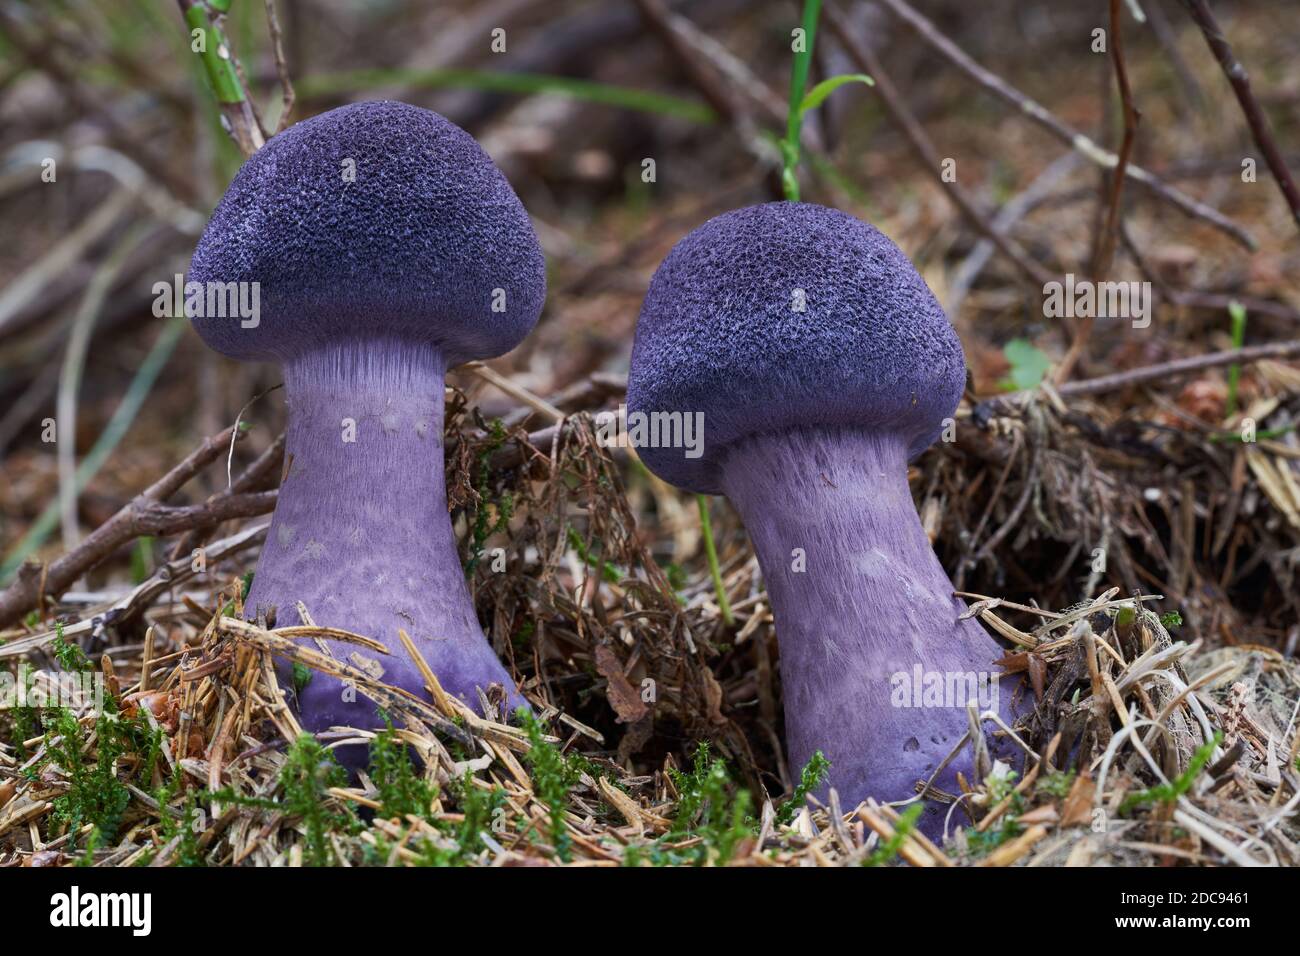 Inedible mushroom Cortinarius hercynicus in the spruce forest. Violet mushroom growing in the moss. Stock Photo